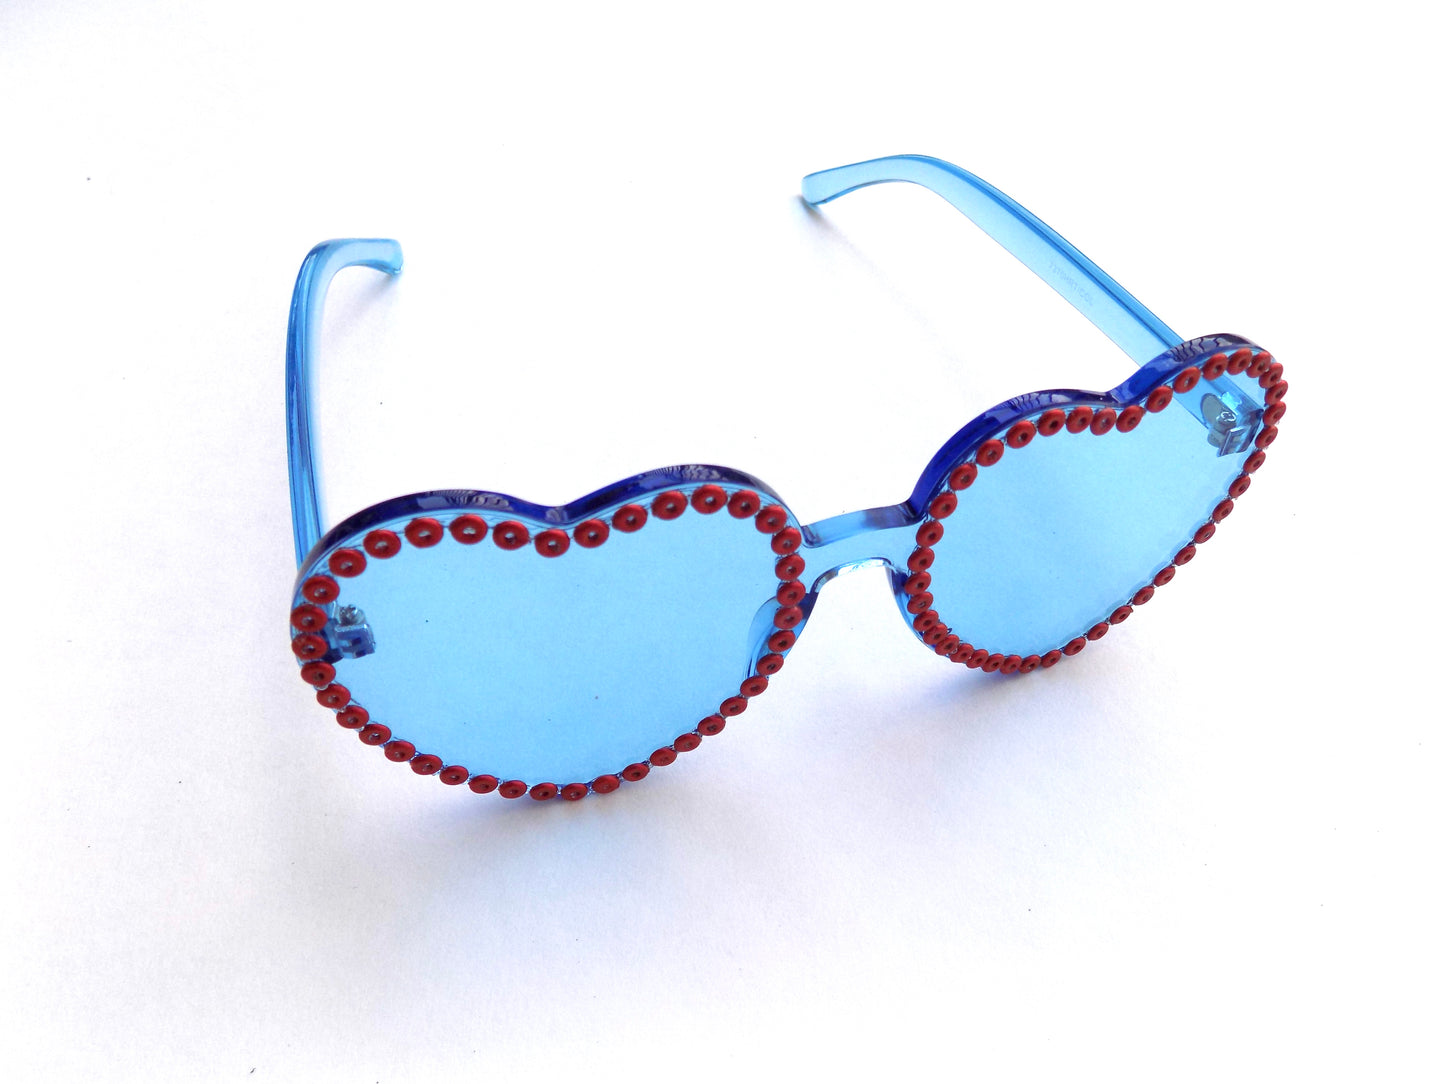 PHISH LOVE heart-shaped glasses with Fishman donuts